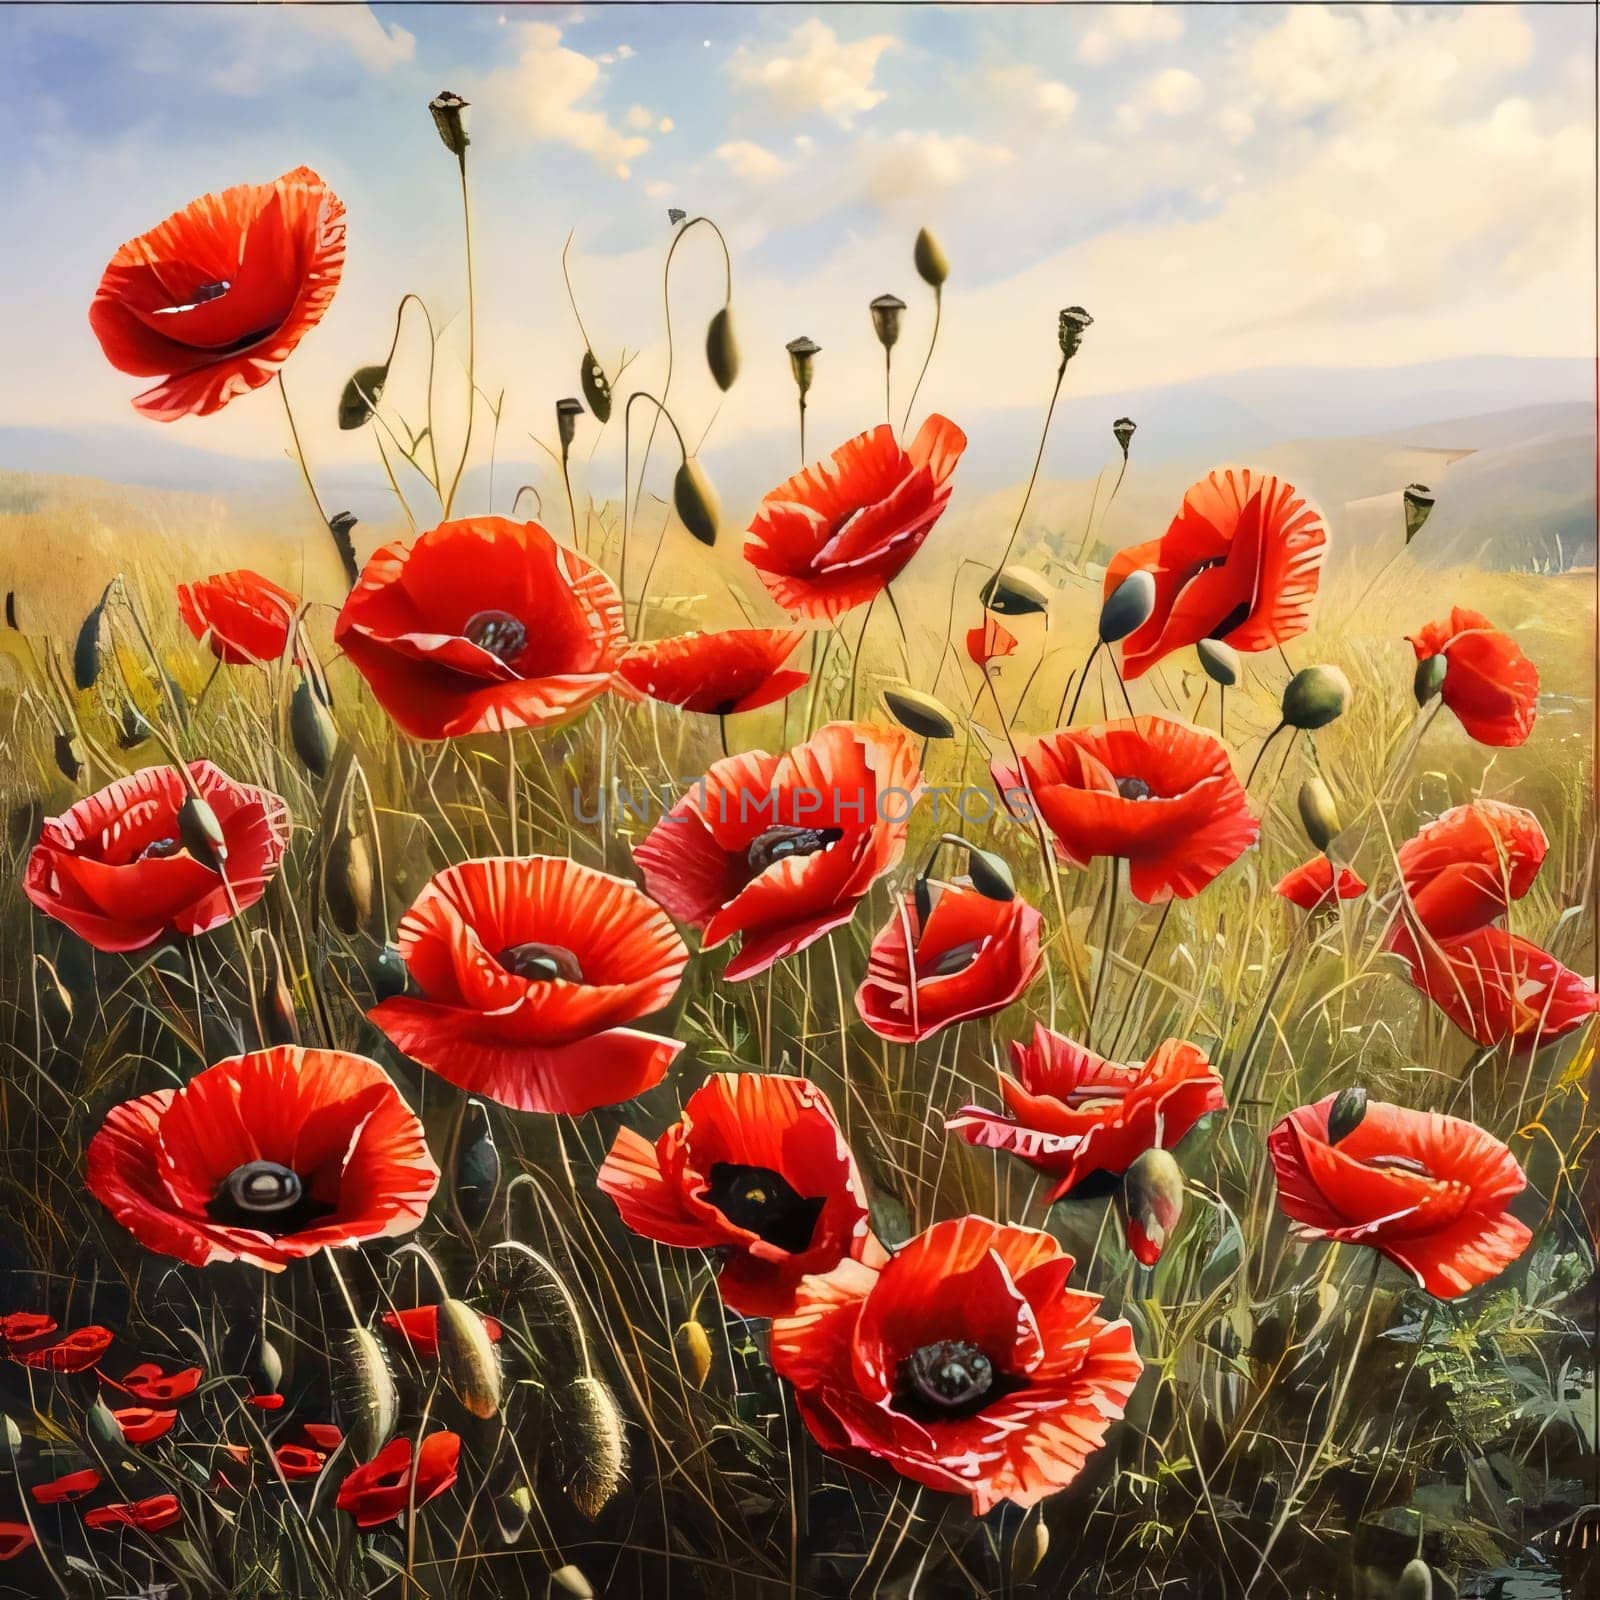 Illustration of red poppies in a green farm field. Flowering flowers, a symbol of spring, new life. by ThemesS